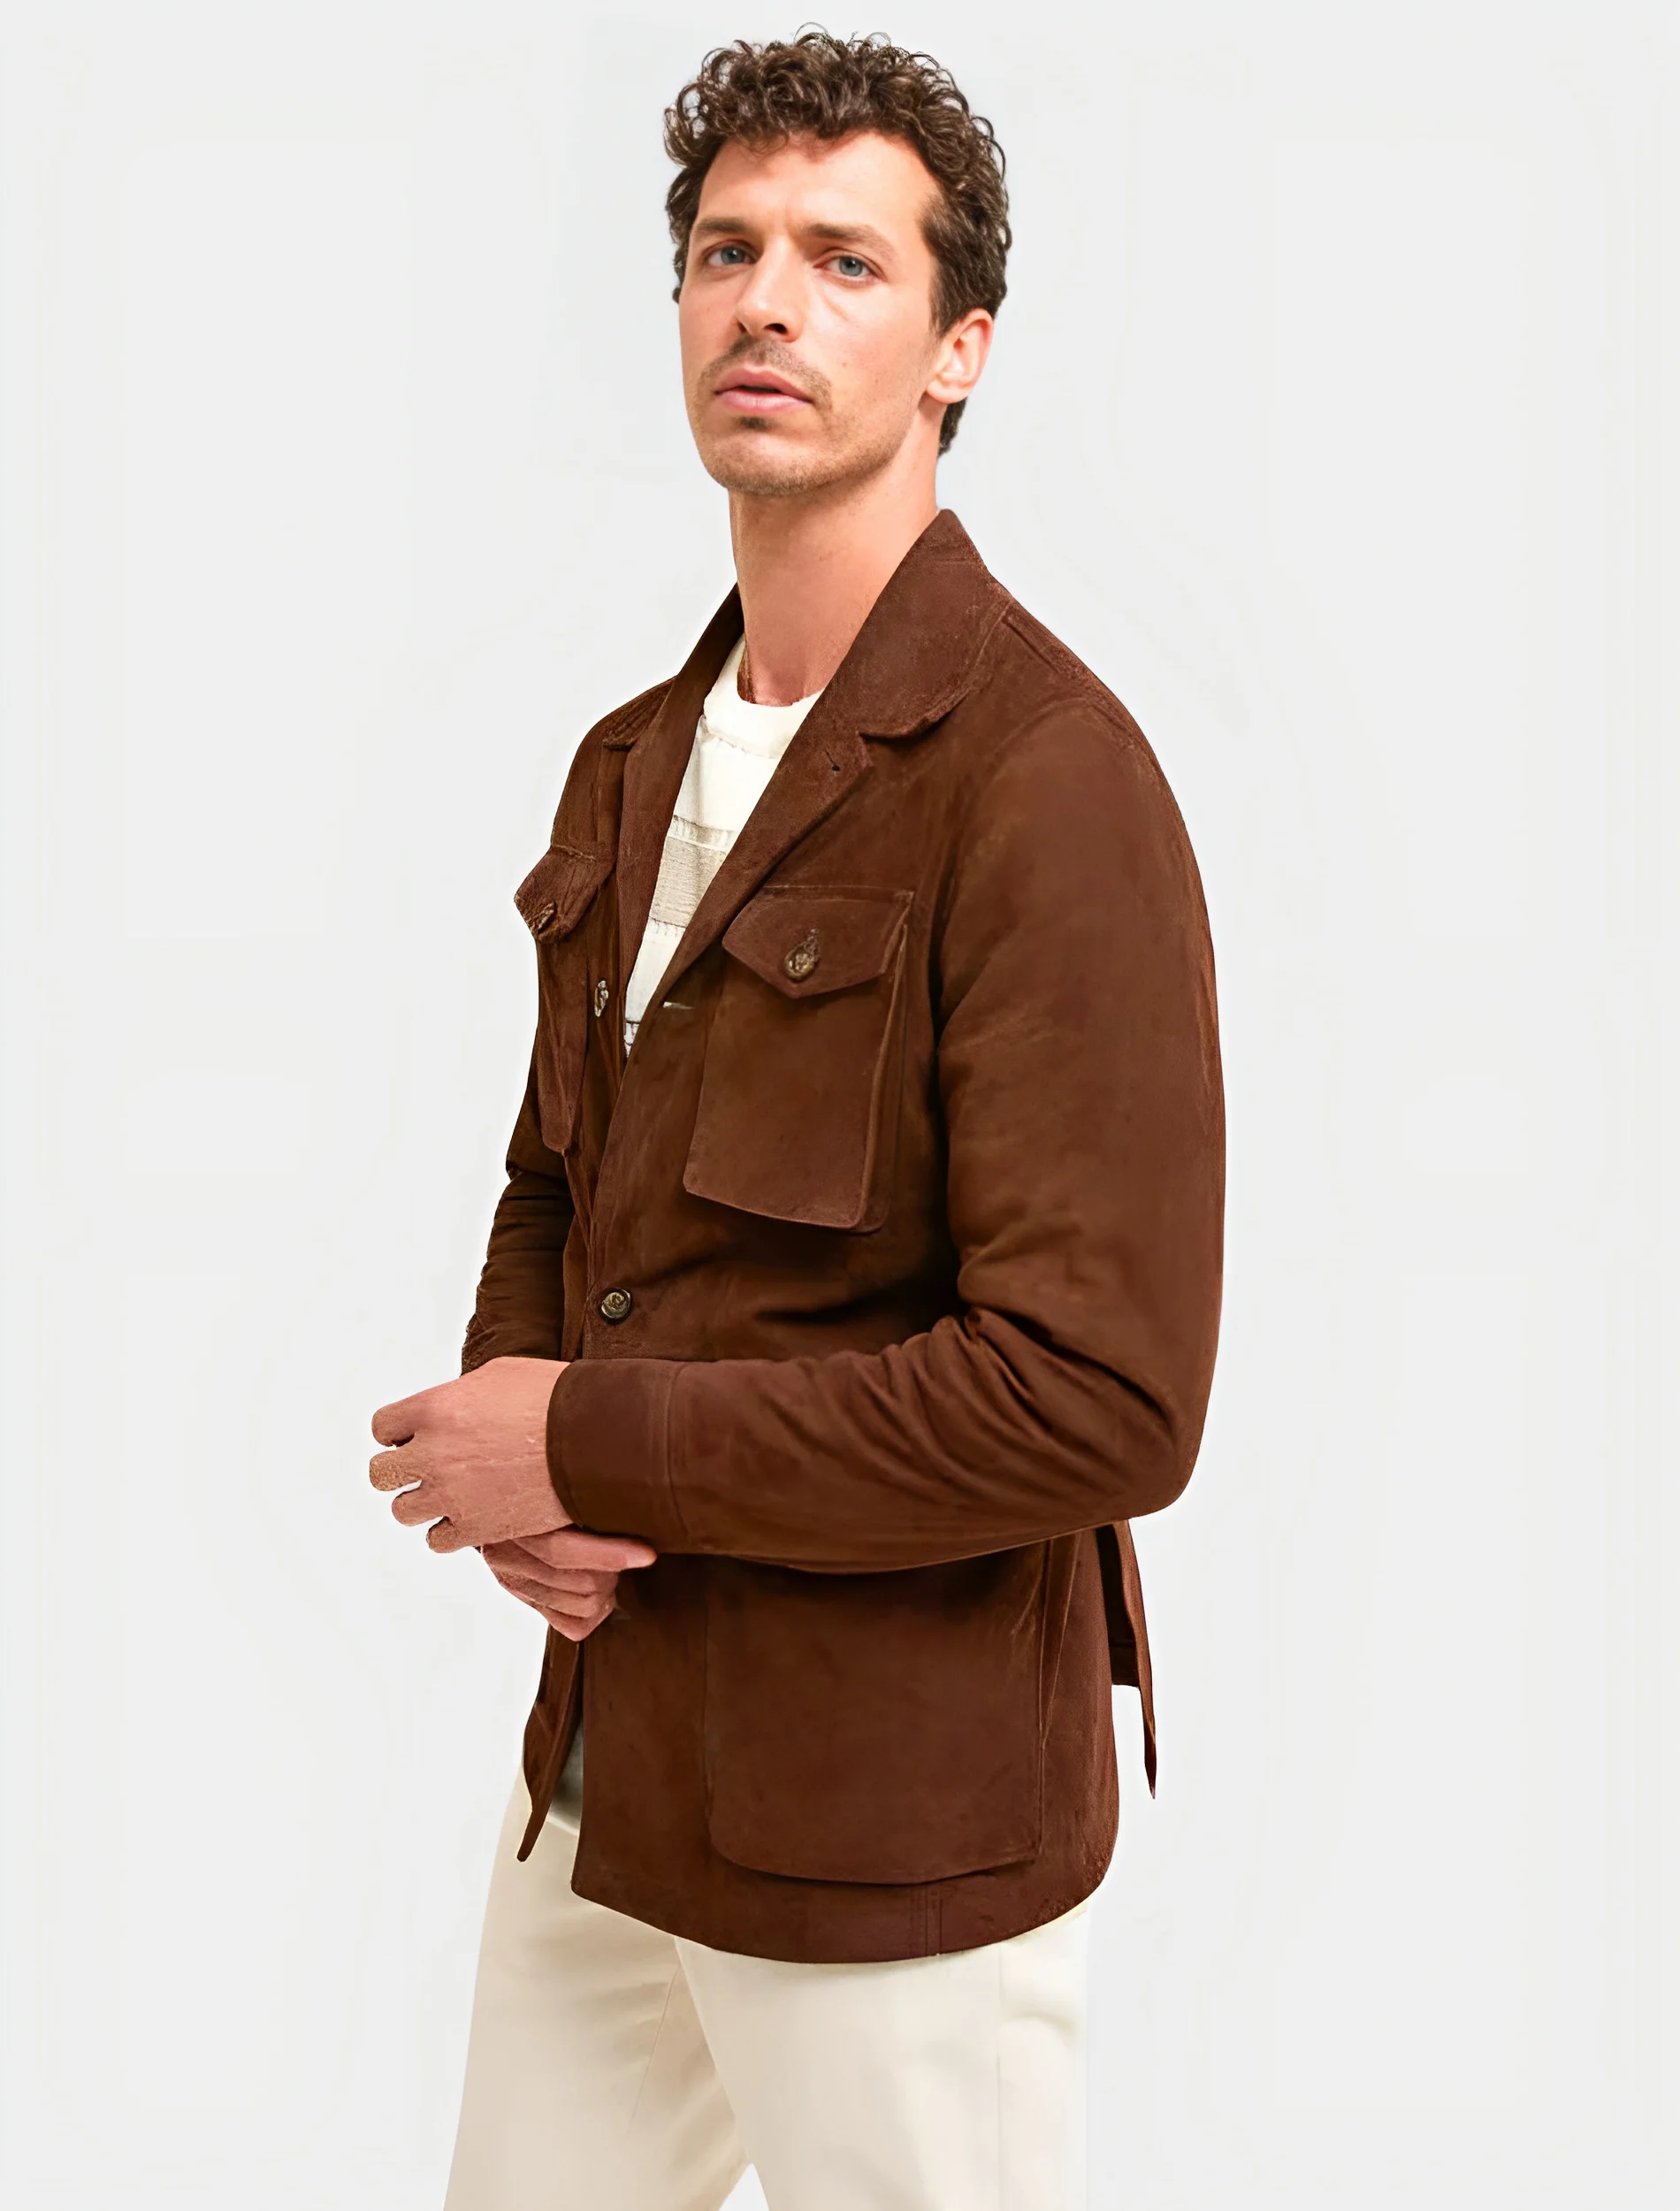 Classic Dark Brown Suede Leather Safari Jacket Front